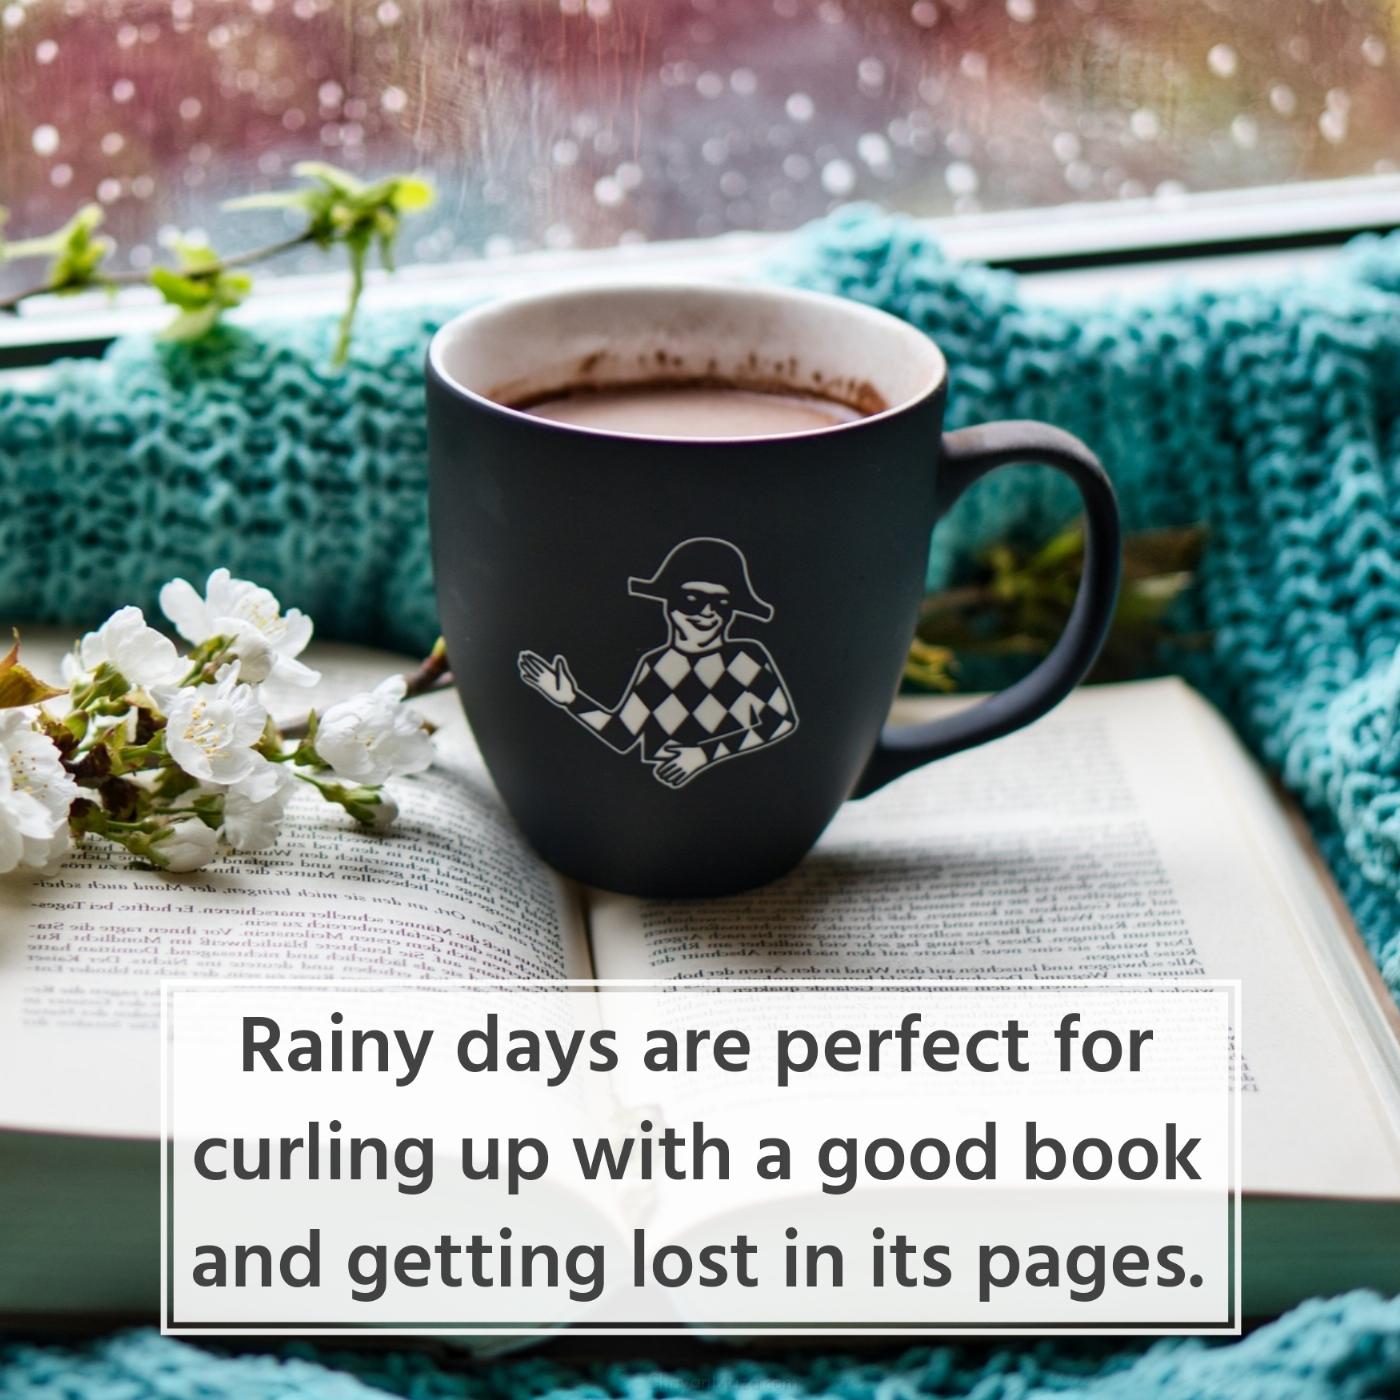 Rainy days are perfect for curling up with a good book